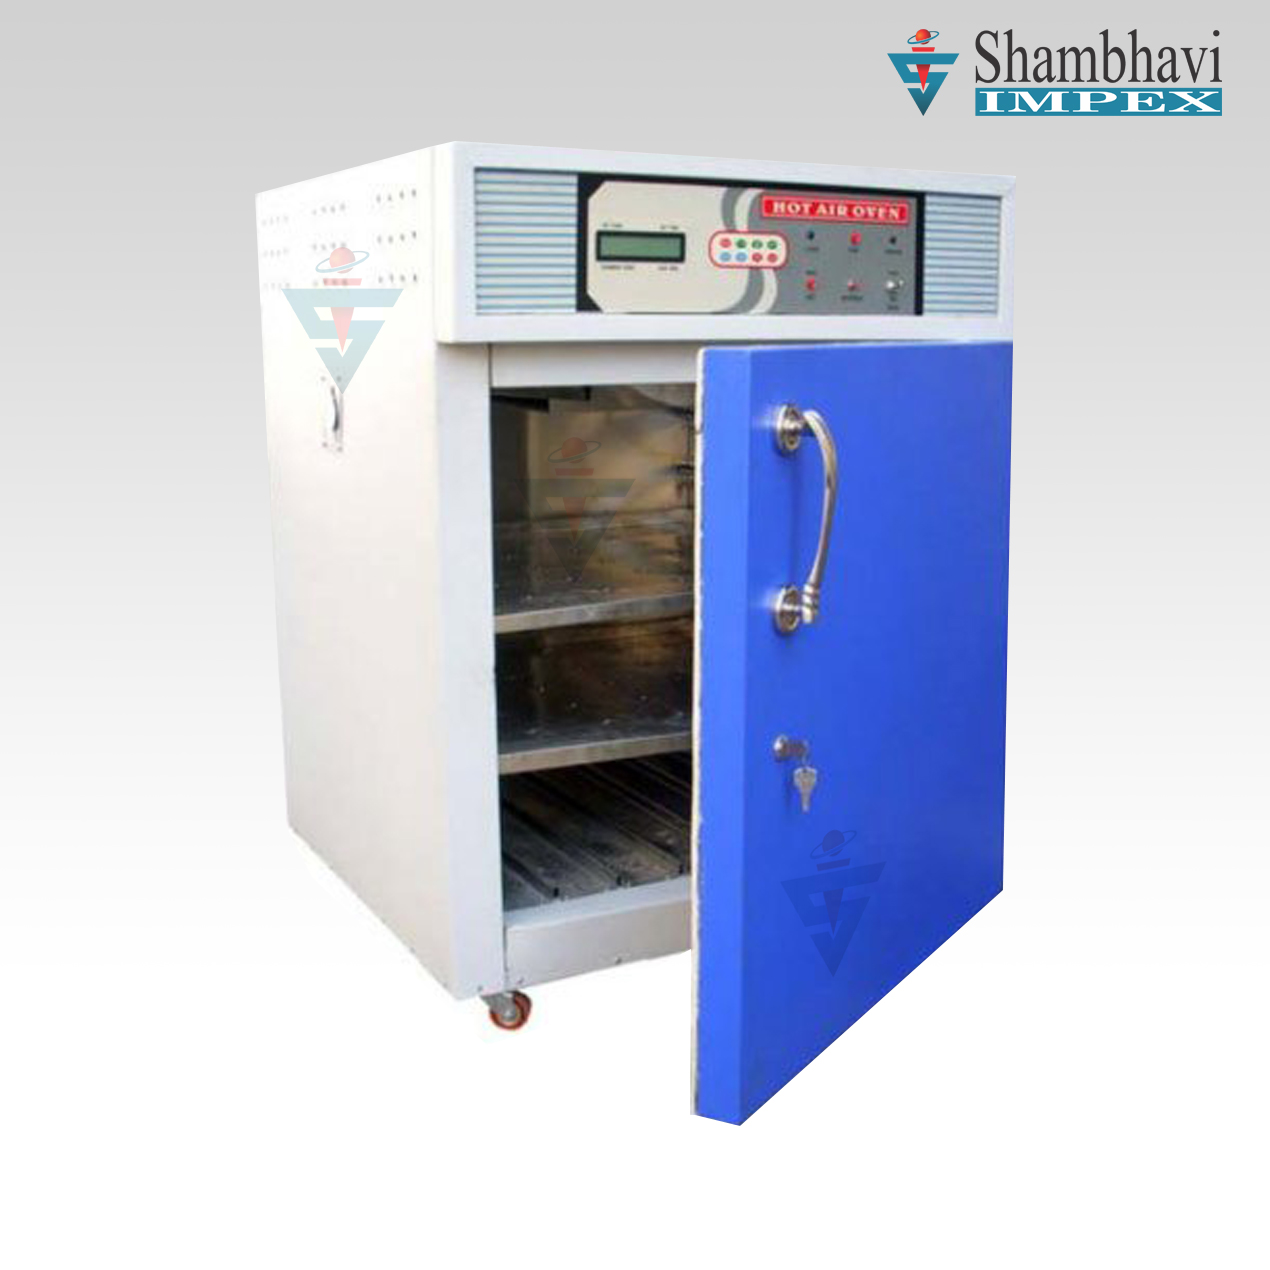 Hot Air Oven (400)